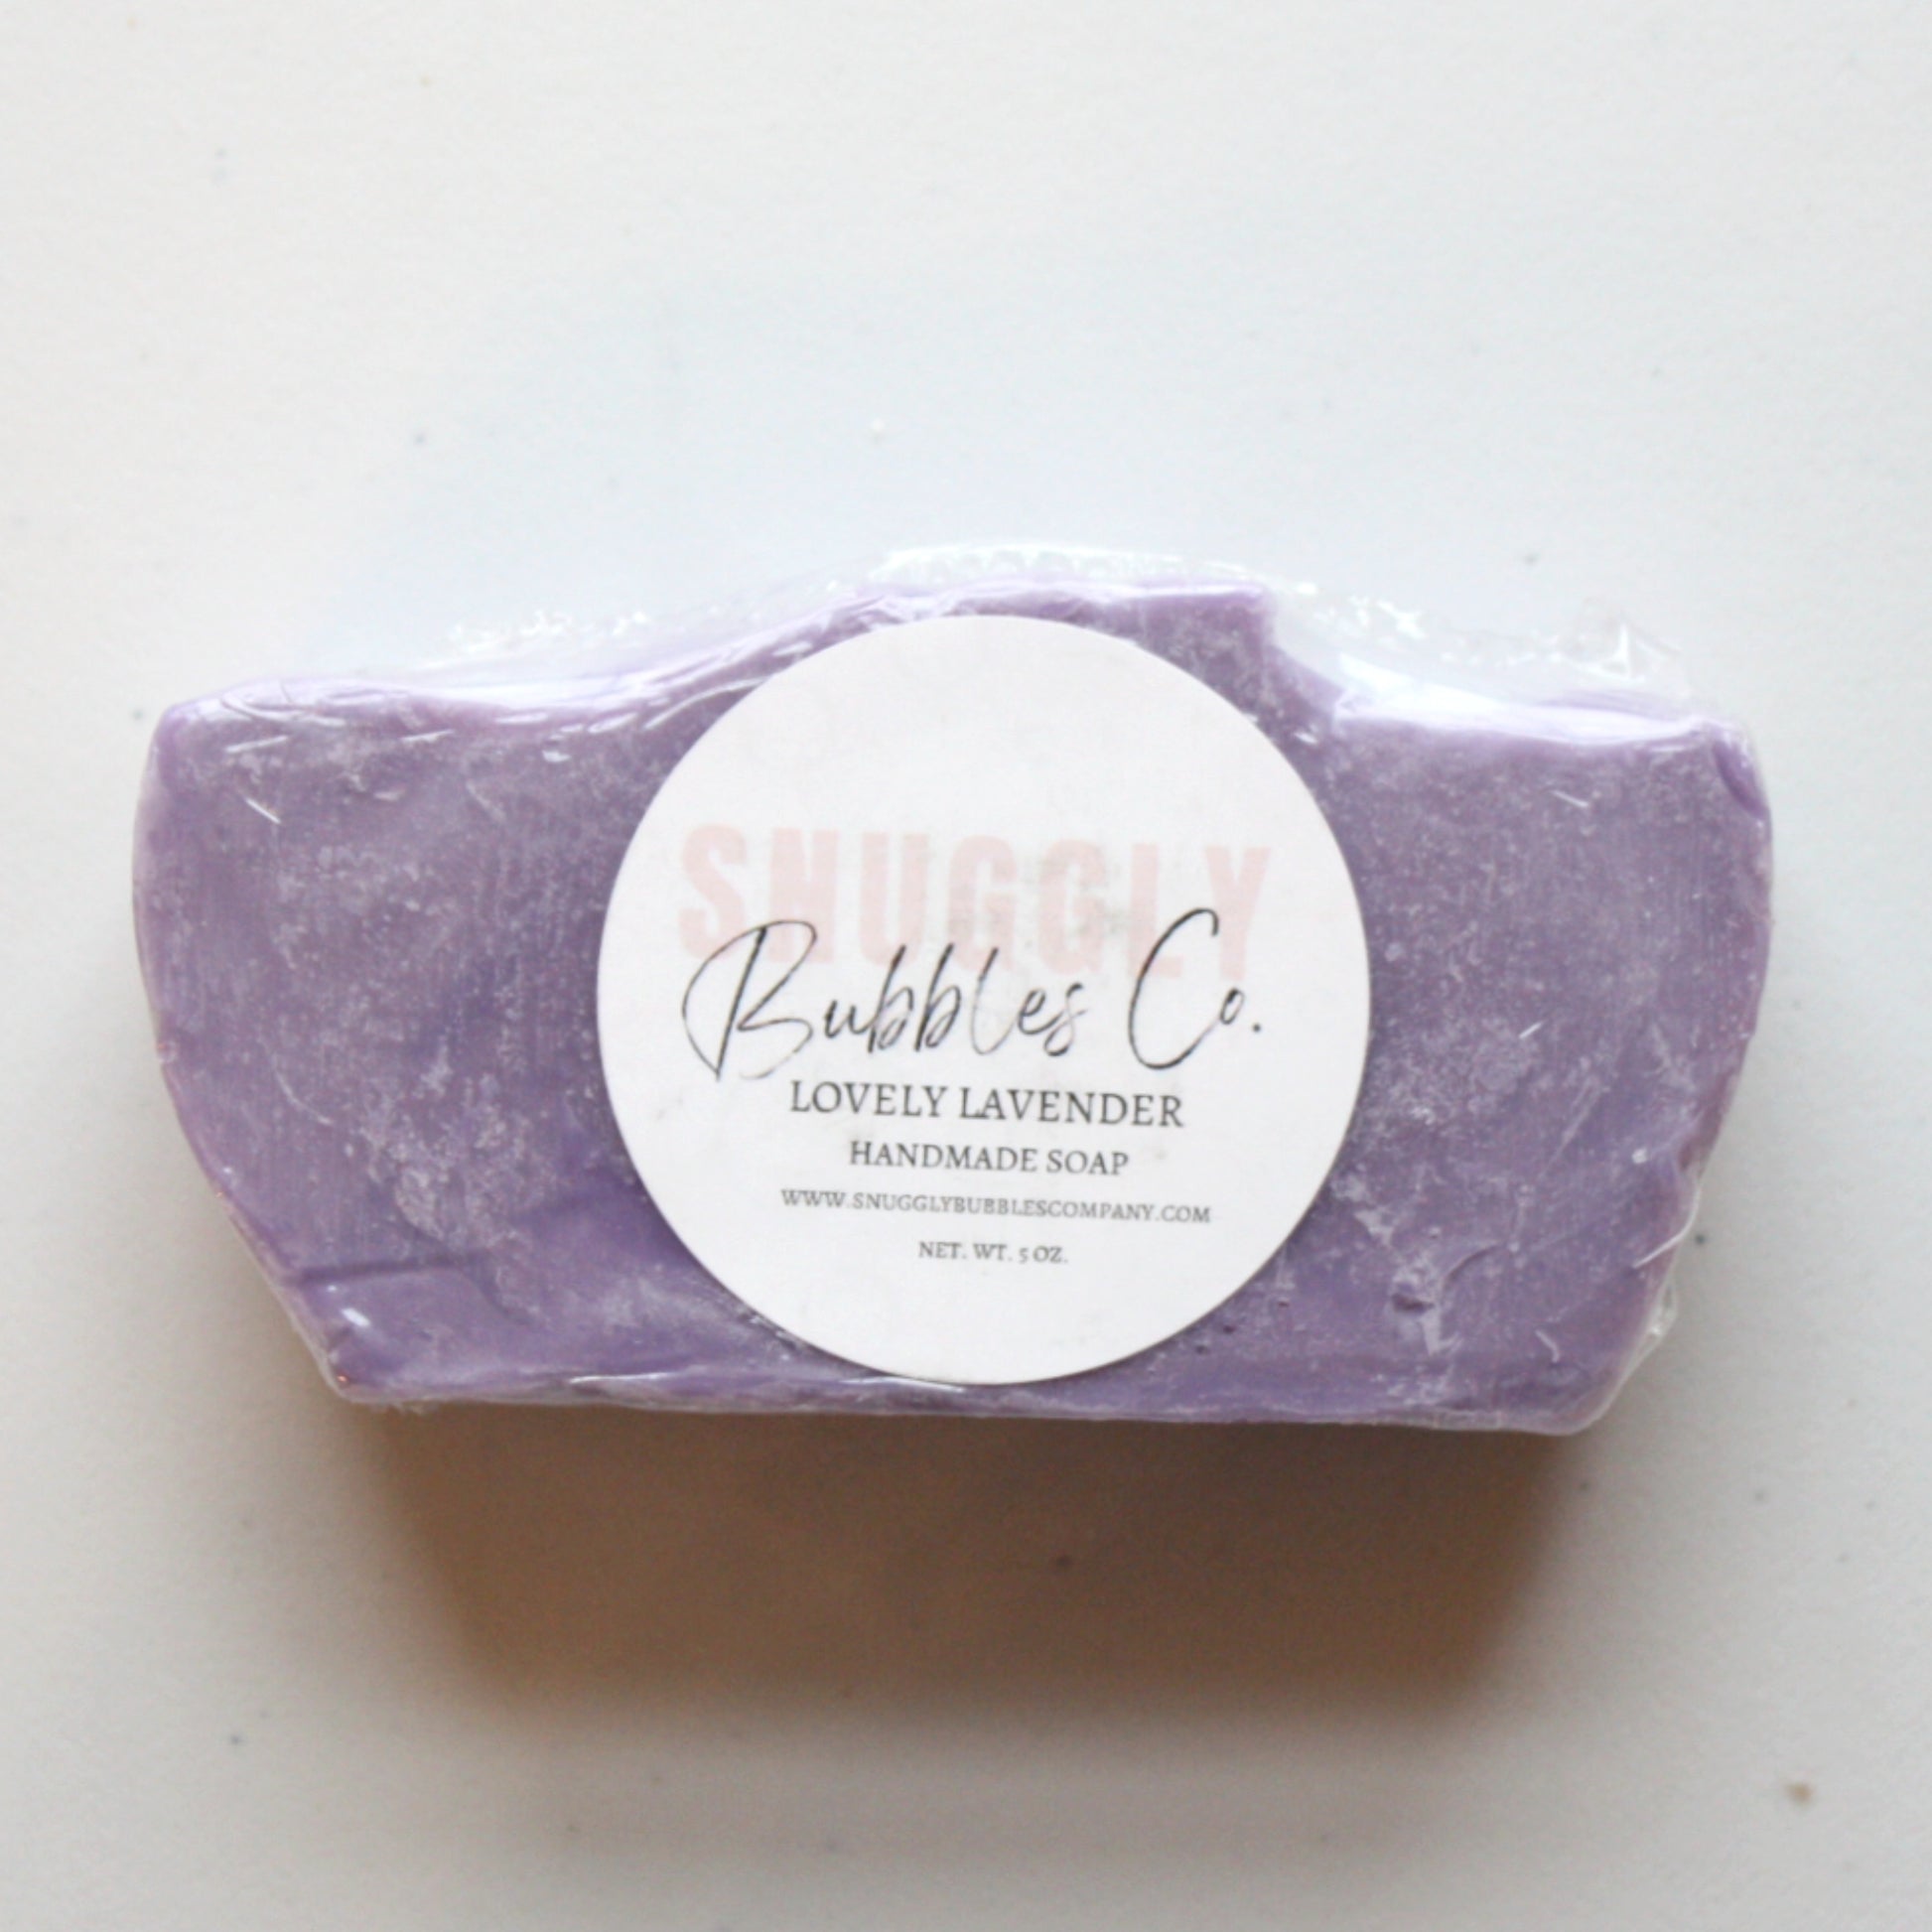 Lovely Lavender Bubbly Handmade Soap - Made in the USA